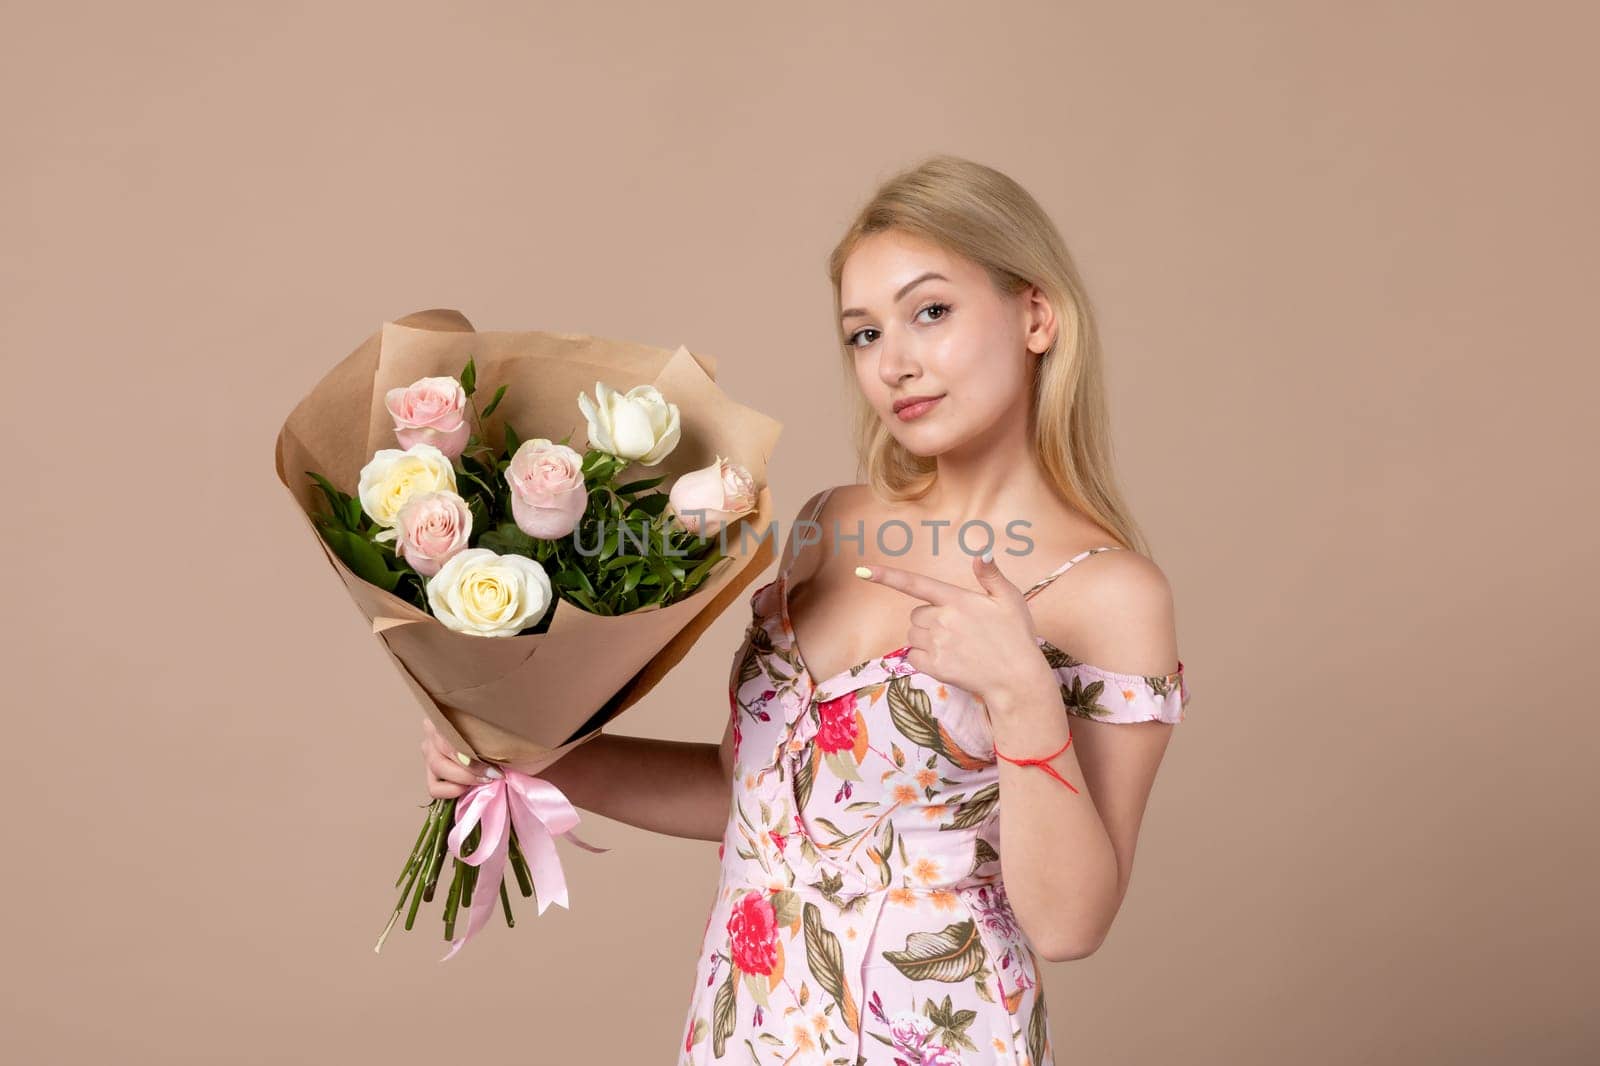 front view young female posing with bouquet of beautiful roses on brown background feminine sensual horizontal march gift equality woman